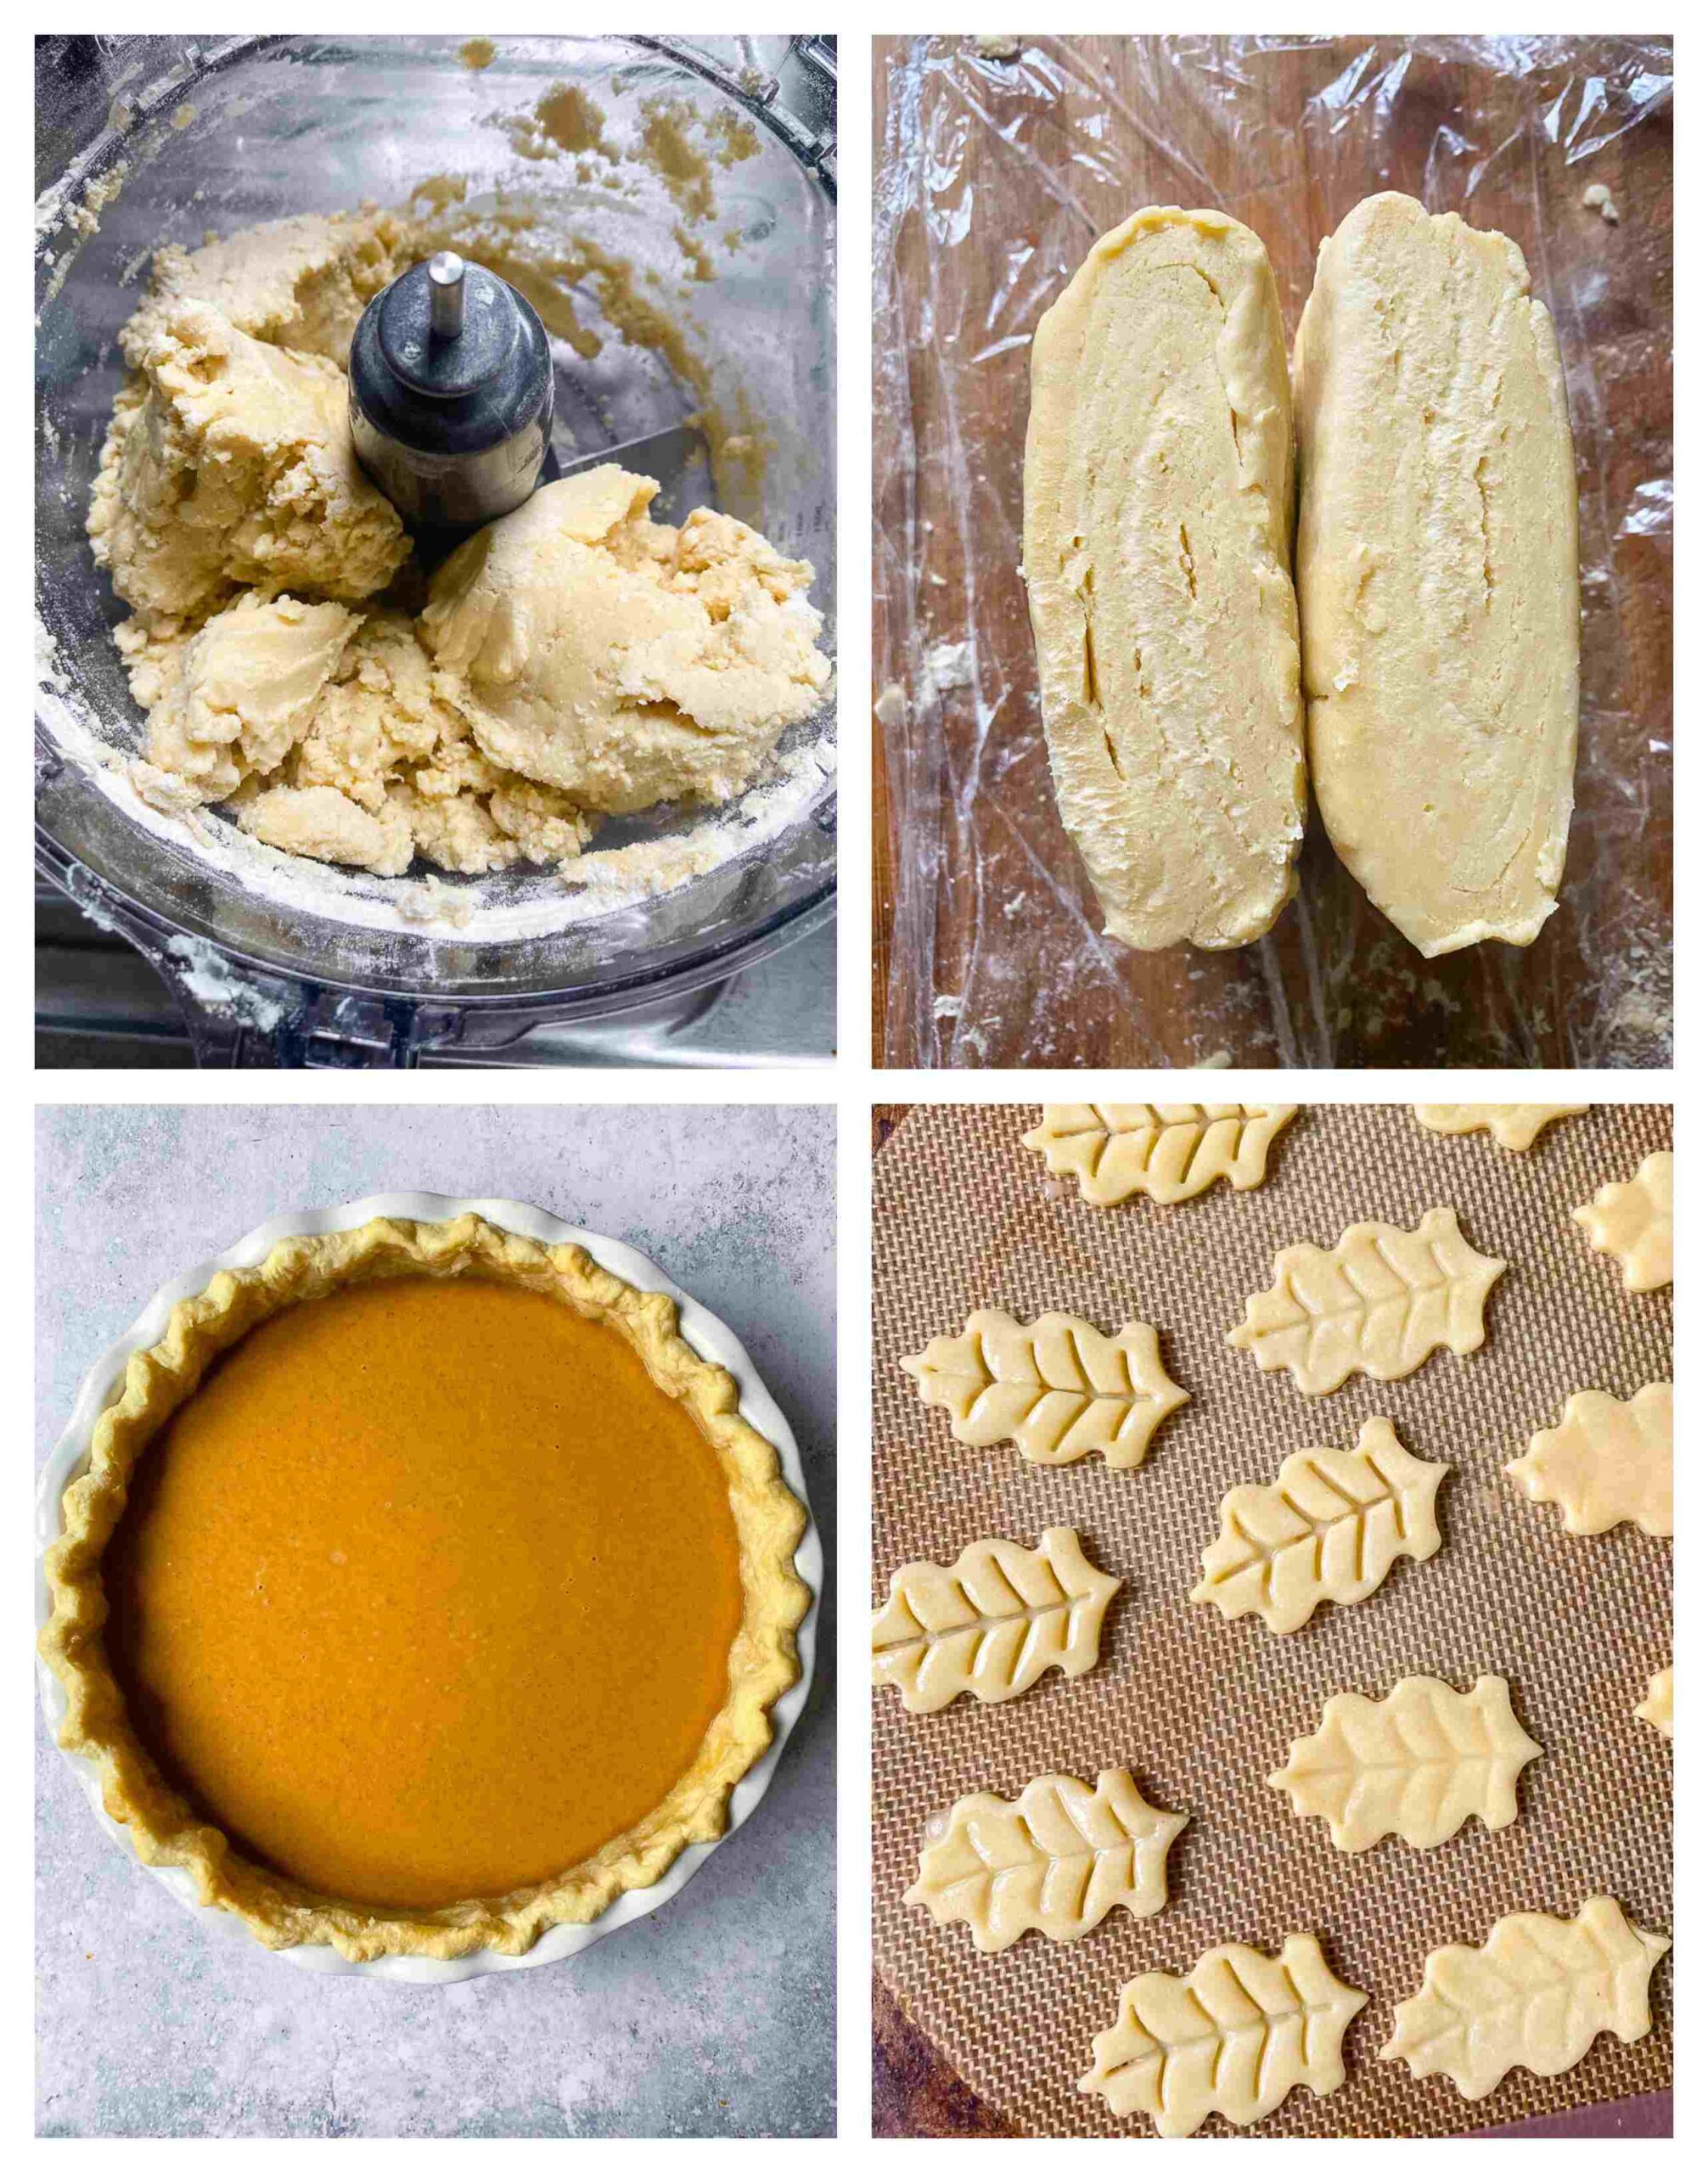 4 pictures in a collage of the pumpkin pie making process